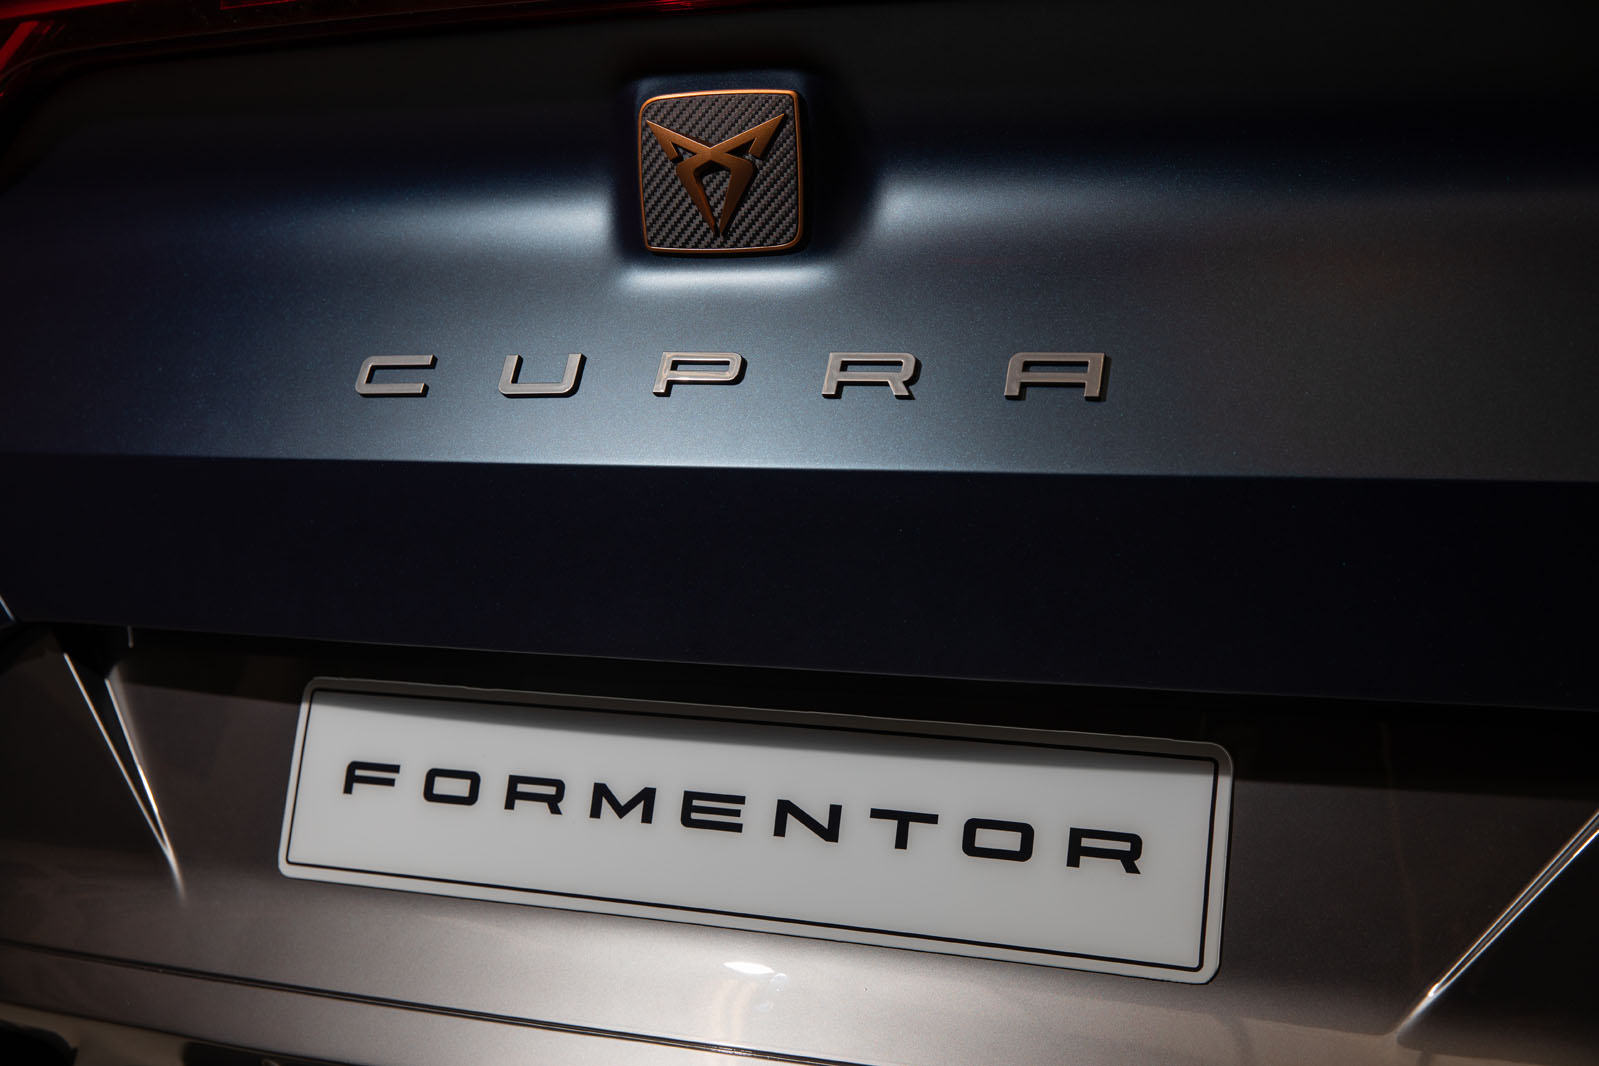 Cupra Formentor Spy Photos Show SUV Disguised To Look Like Current Model